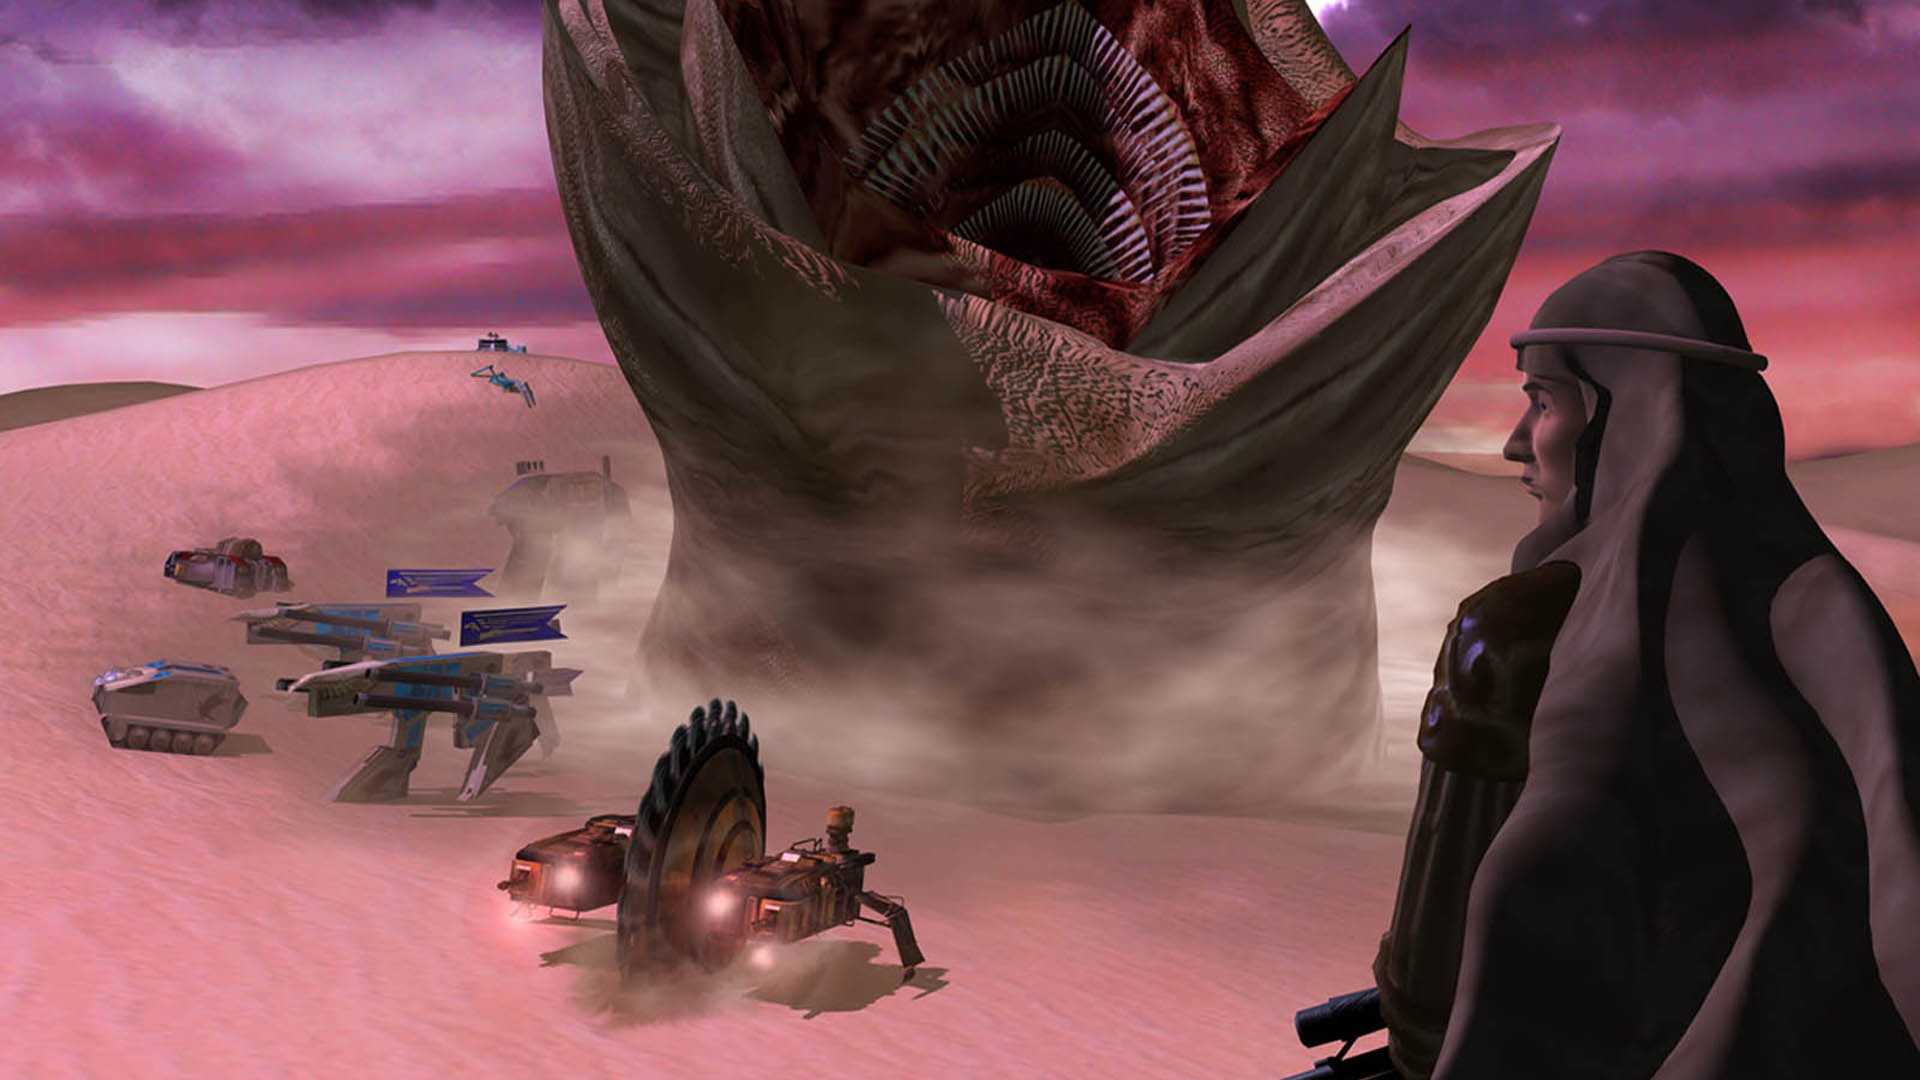 Frank Herbert's Dune is still the template for the entire RTS genre ...